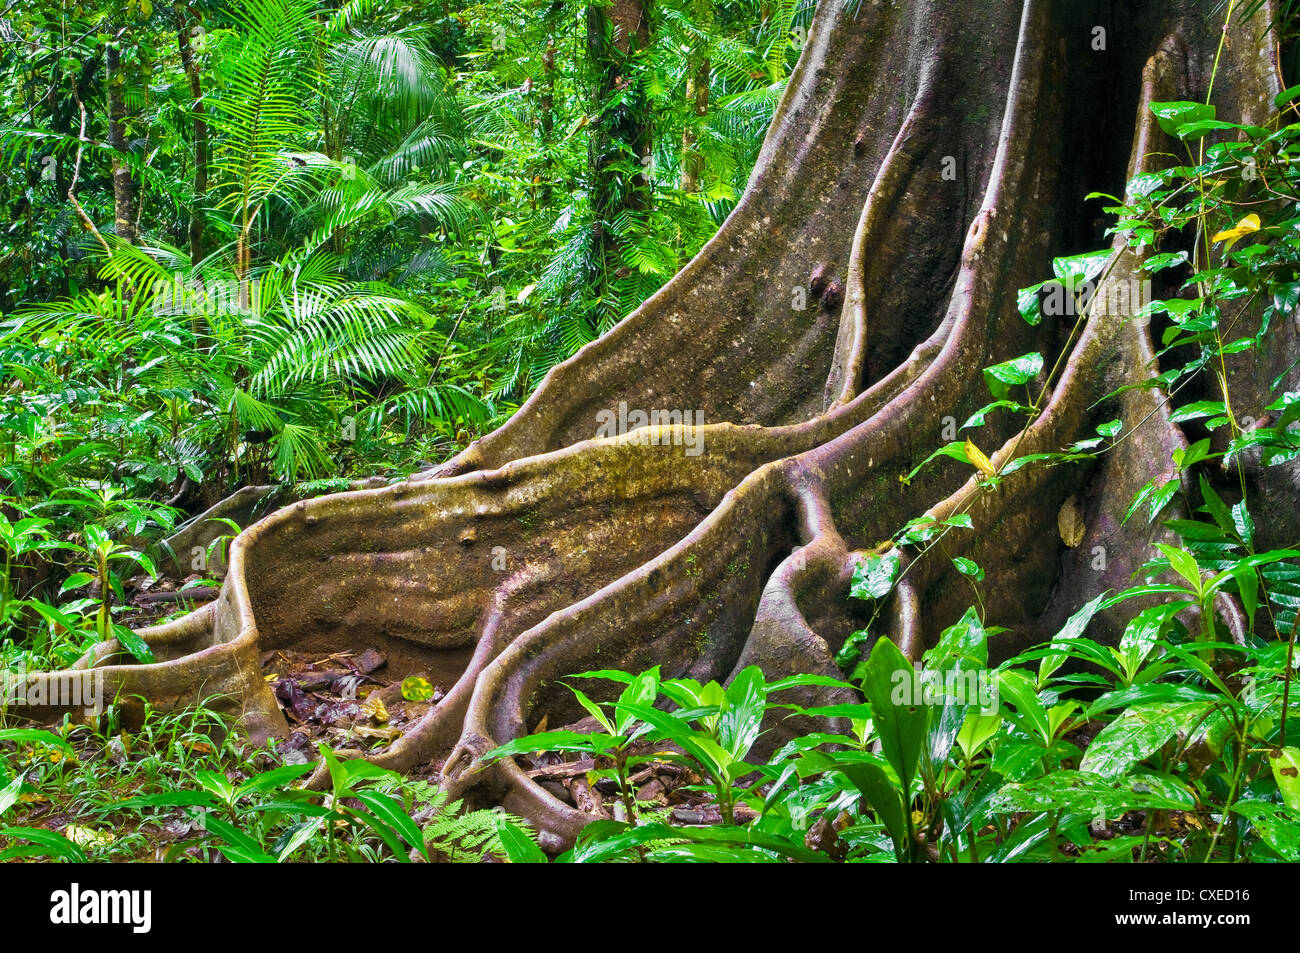 Giant root of an ancient rainforest tree in the Wet Tropics. Stock Photo